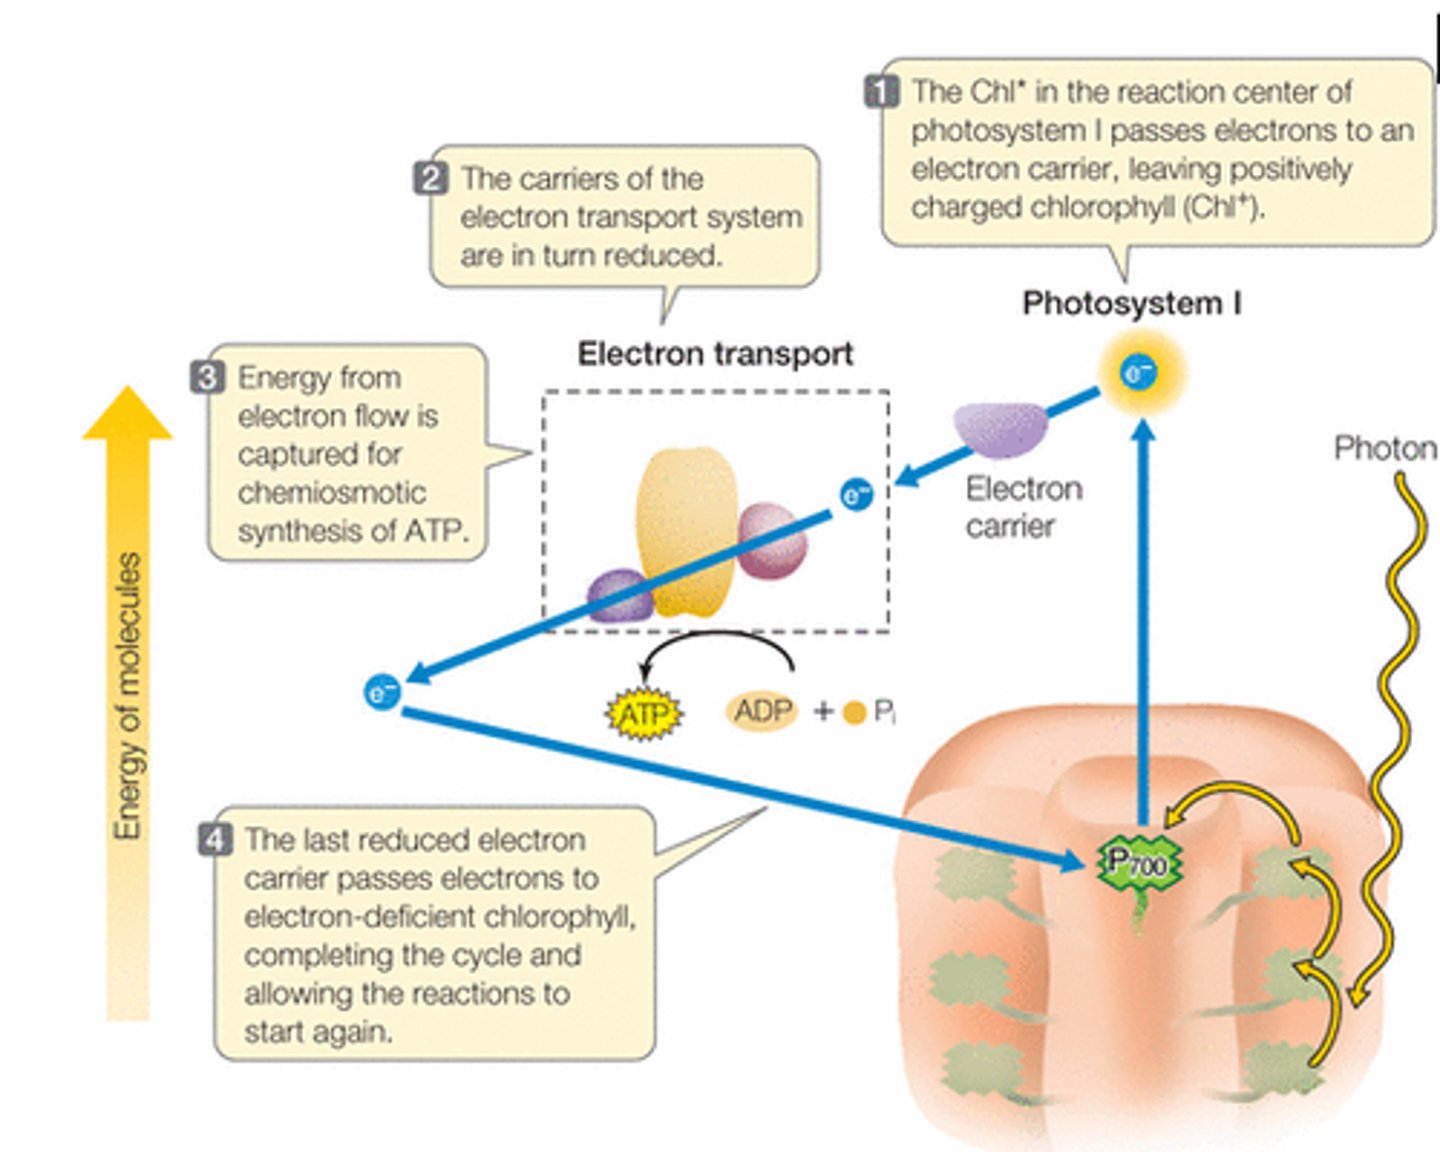 <p>in photosynthetic light reactions, the flow of electrons that produces ATP but no NADPH or O2.</p>